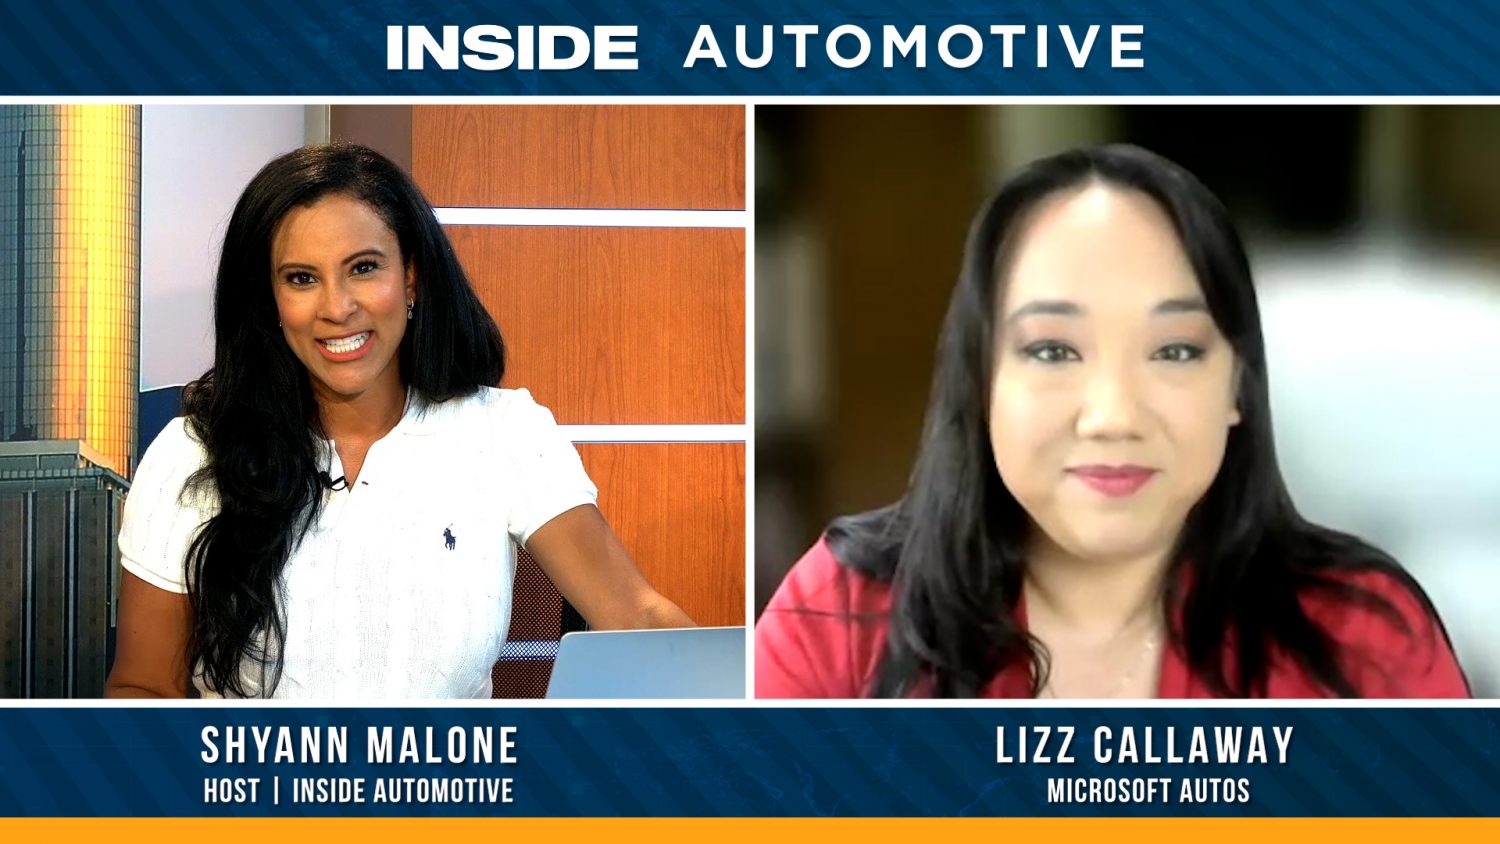 On the latest episode of Inside Automotive, Lizz Callaway joins us to share how privacy and data security is evolving in the industry.